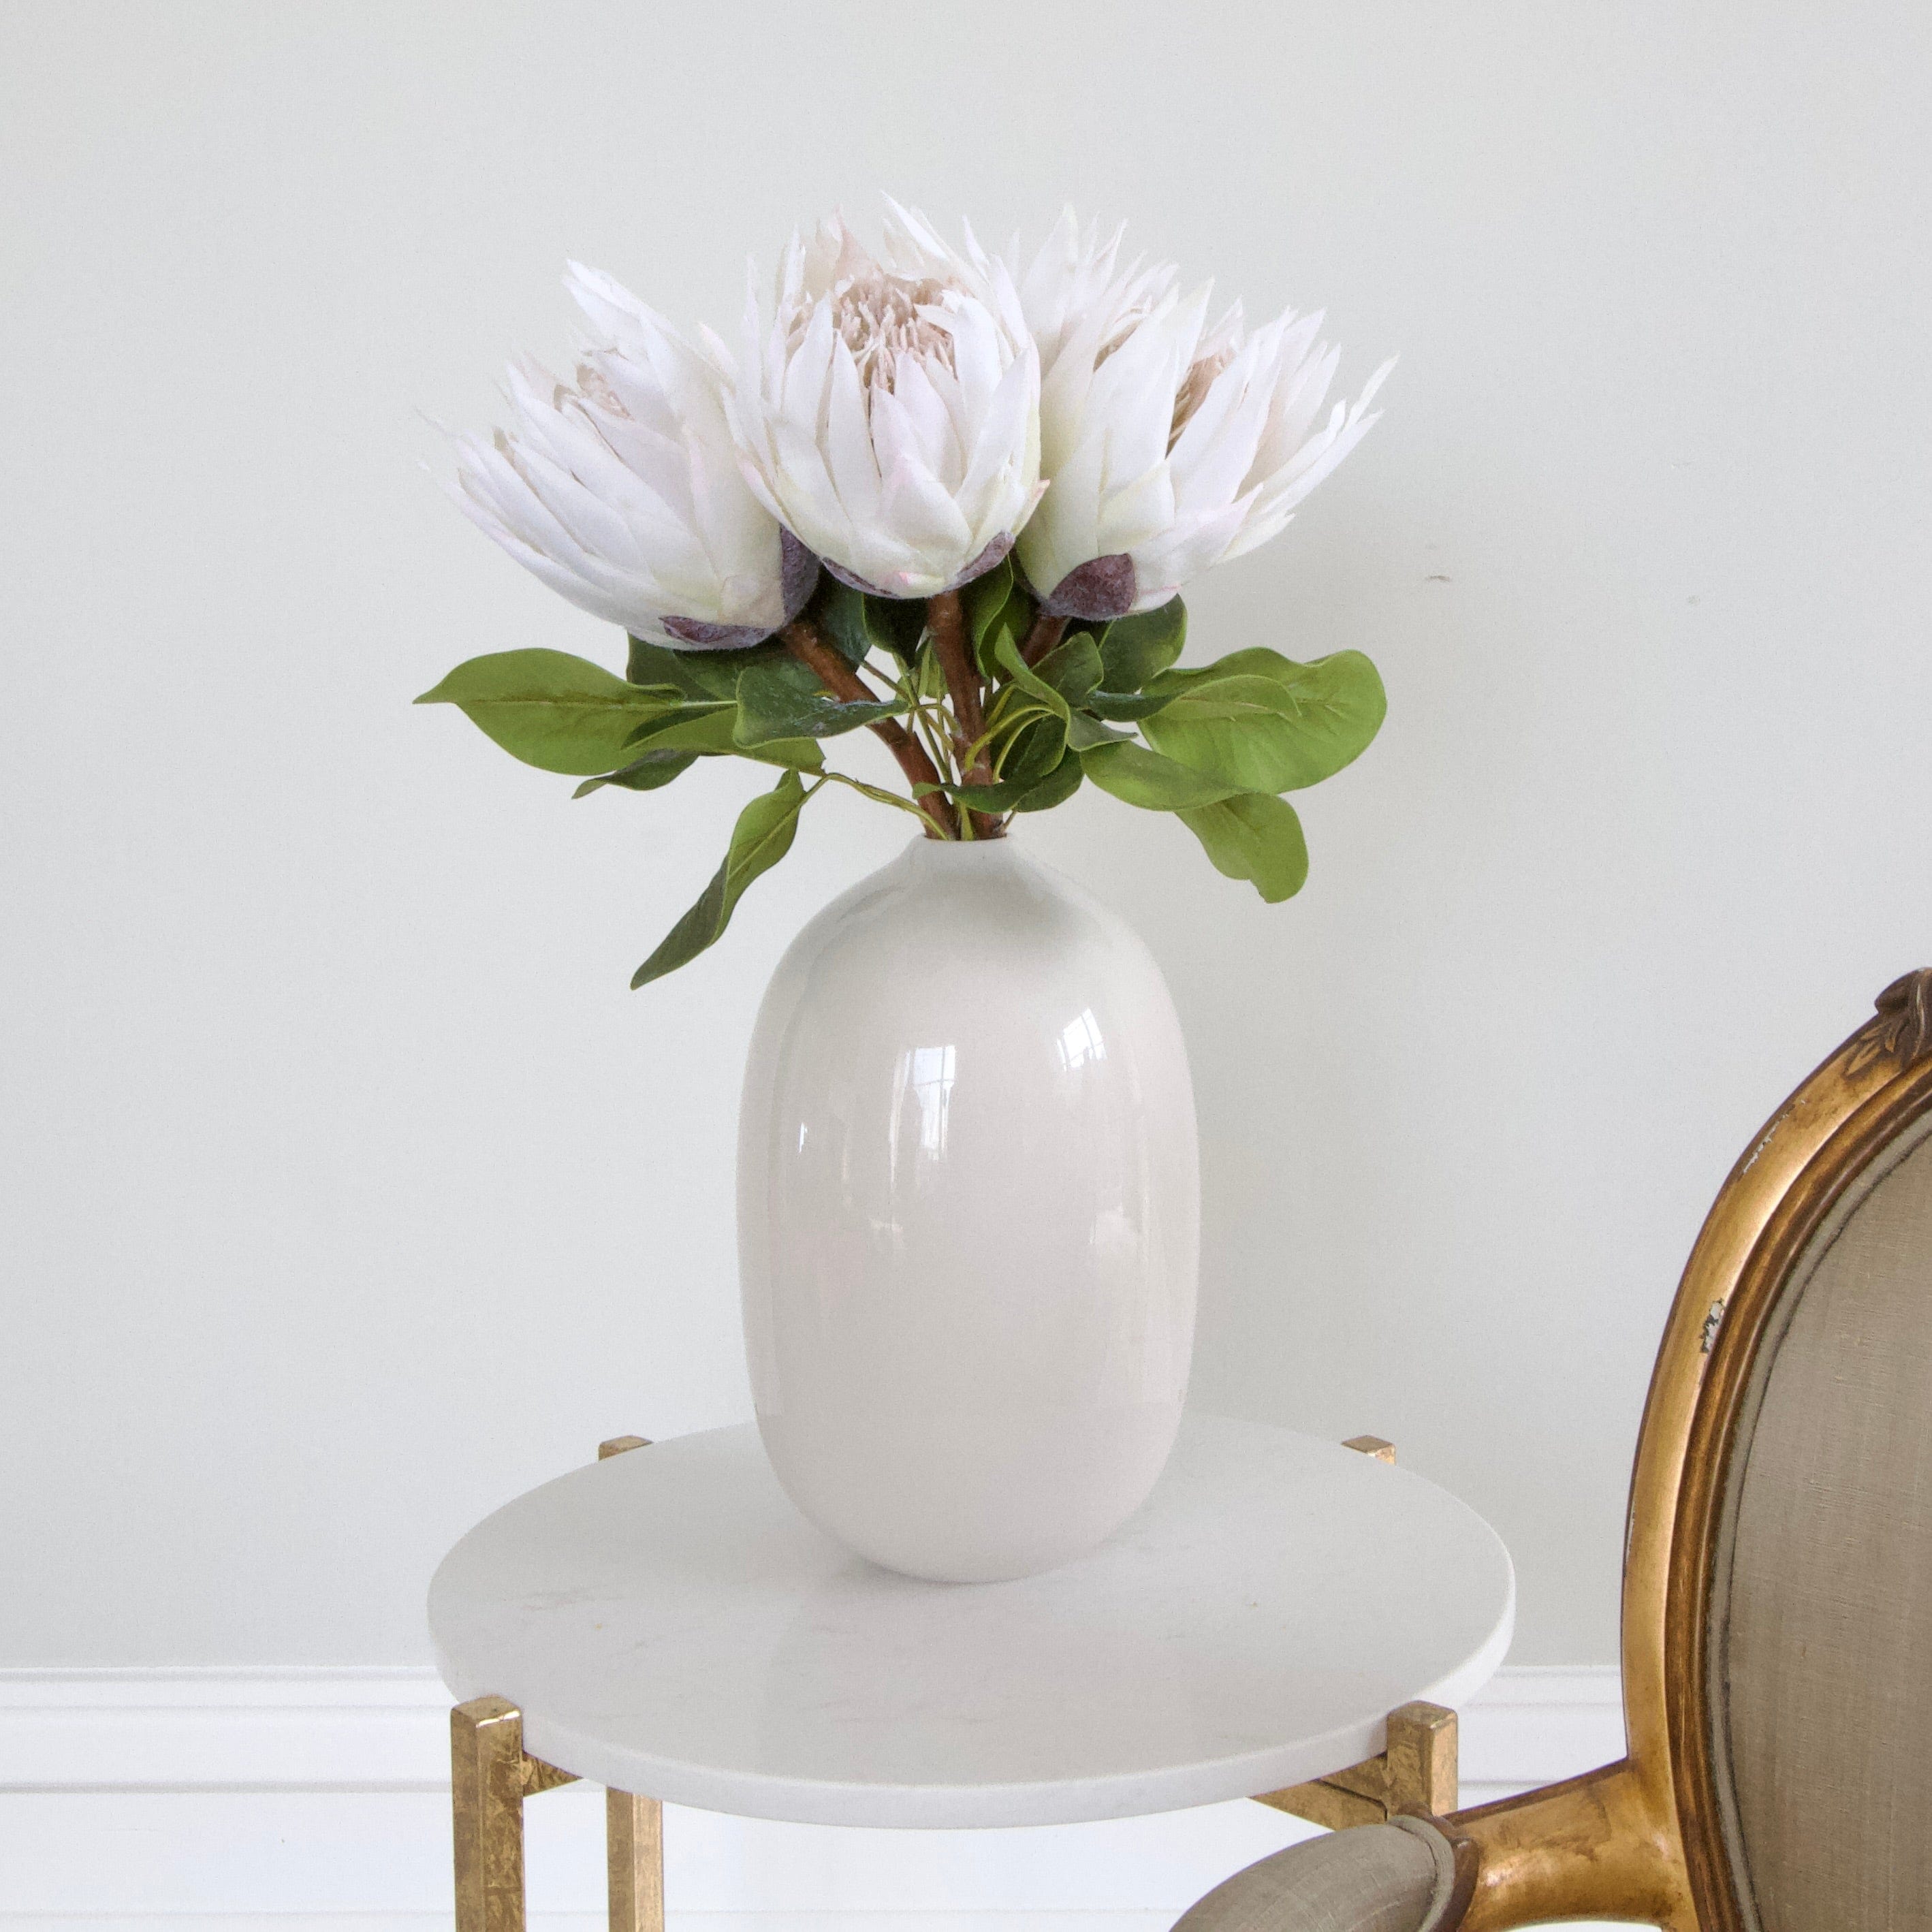 Luxury Lifelike Realistic Artificial Fabric Silk Blooms with Foliage Buy Online from The Faux Flower Company | White King Proteas ABY7018WH White Gloss Ceramic Broadway Vase ABP1699